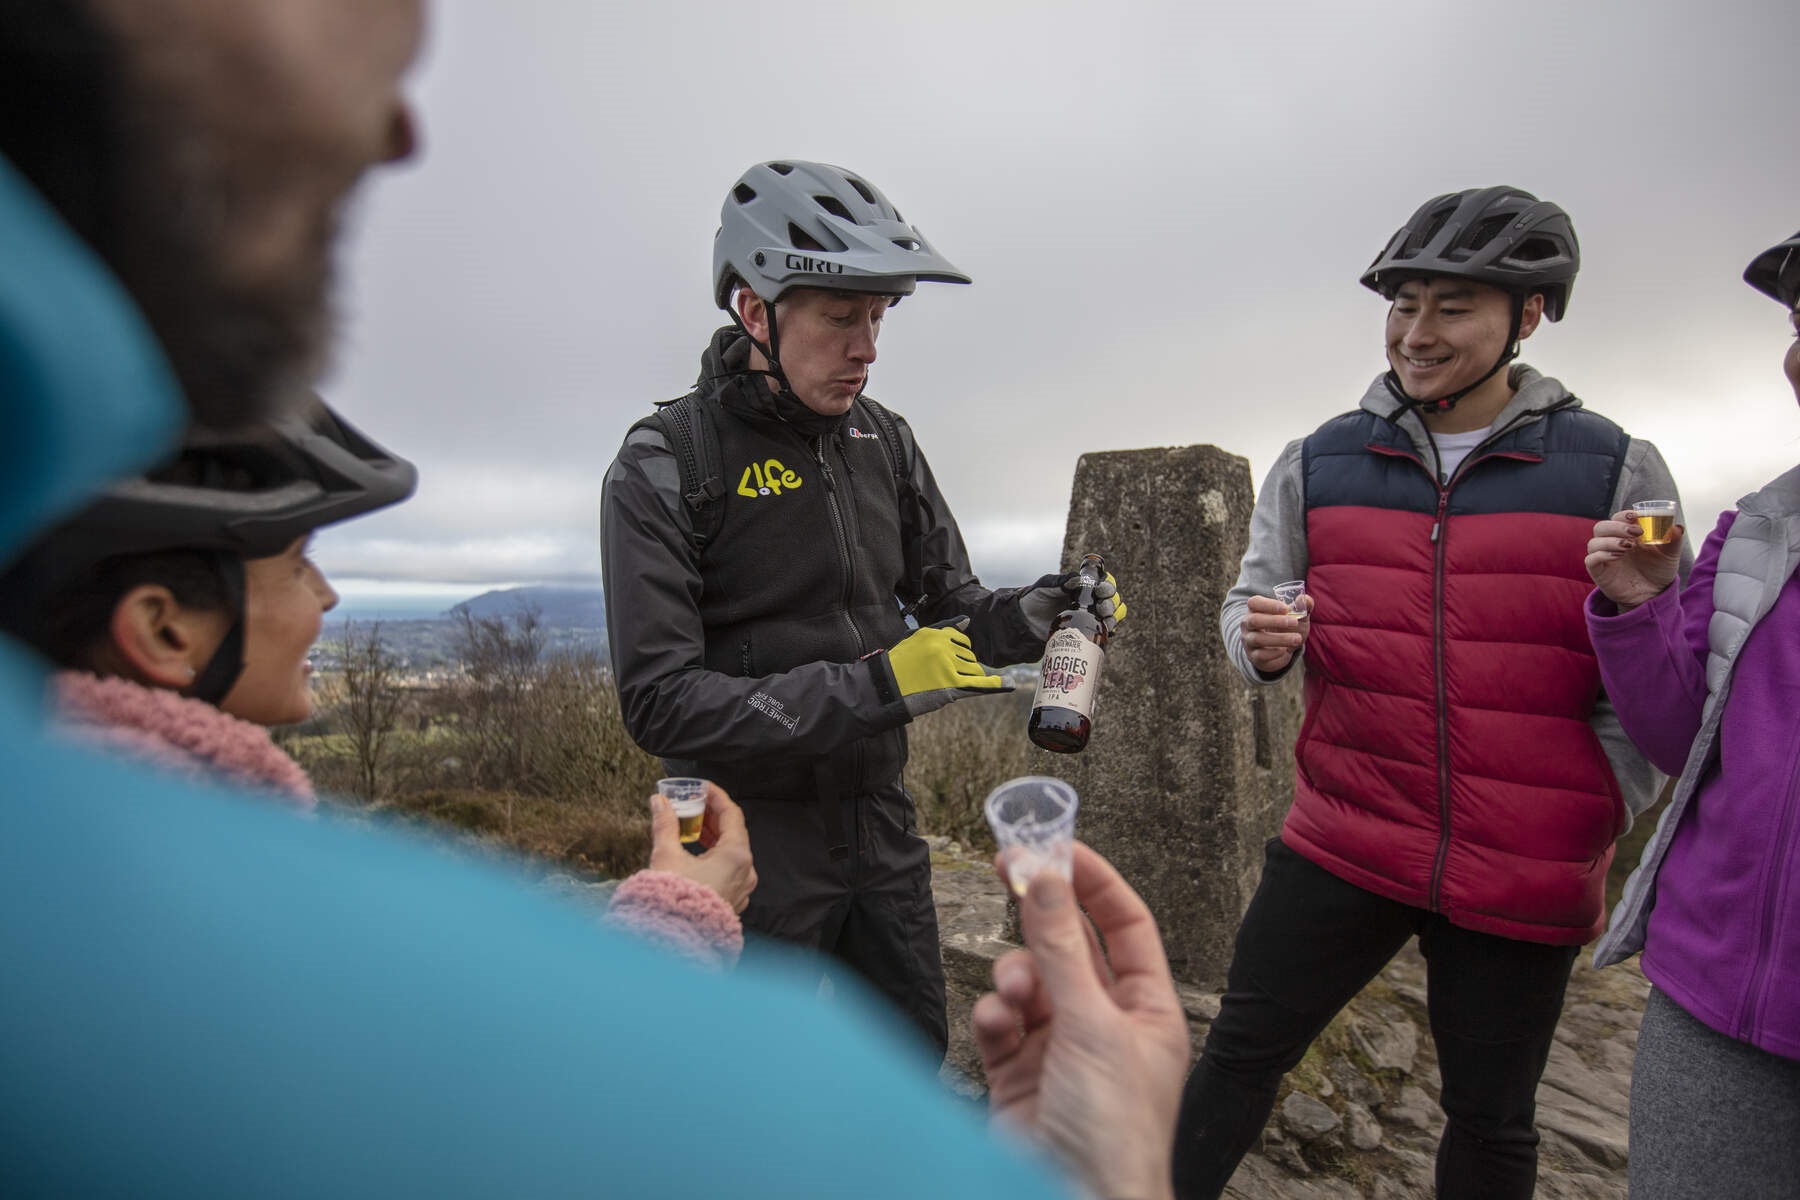 Go further, see more, feel awesome with Bike Mourne’s Trails & Ales of Mourne Tour, an adventure through one of Northern Ireland’s most beautiful regions, with the added buzz of electric bikes.